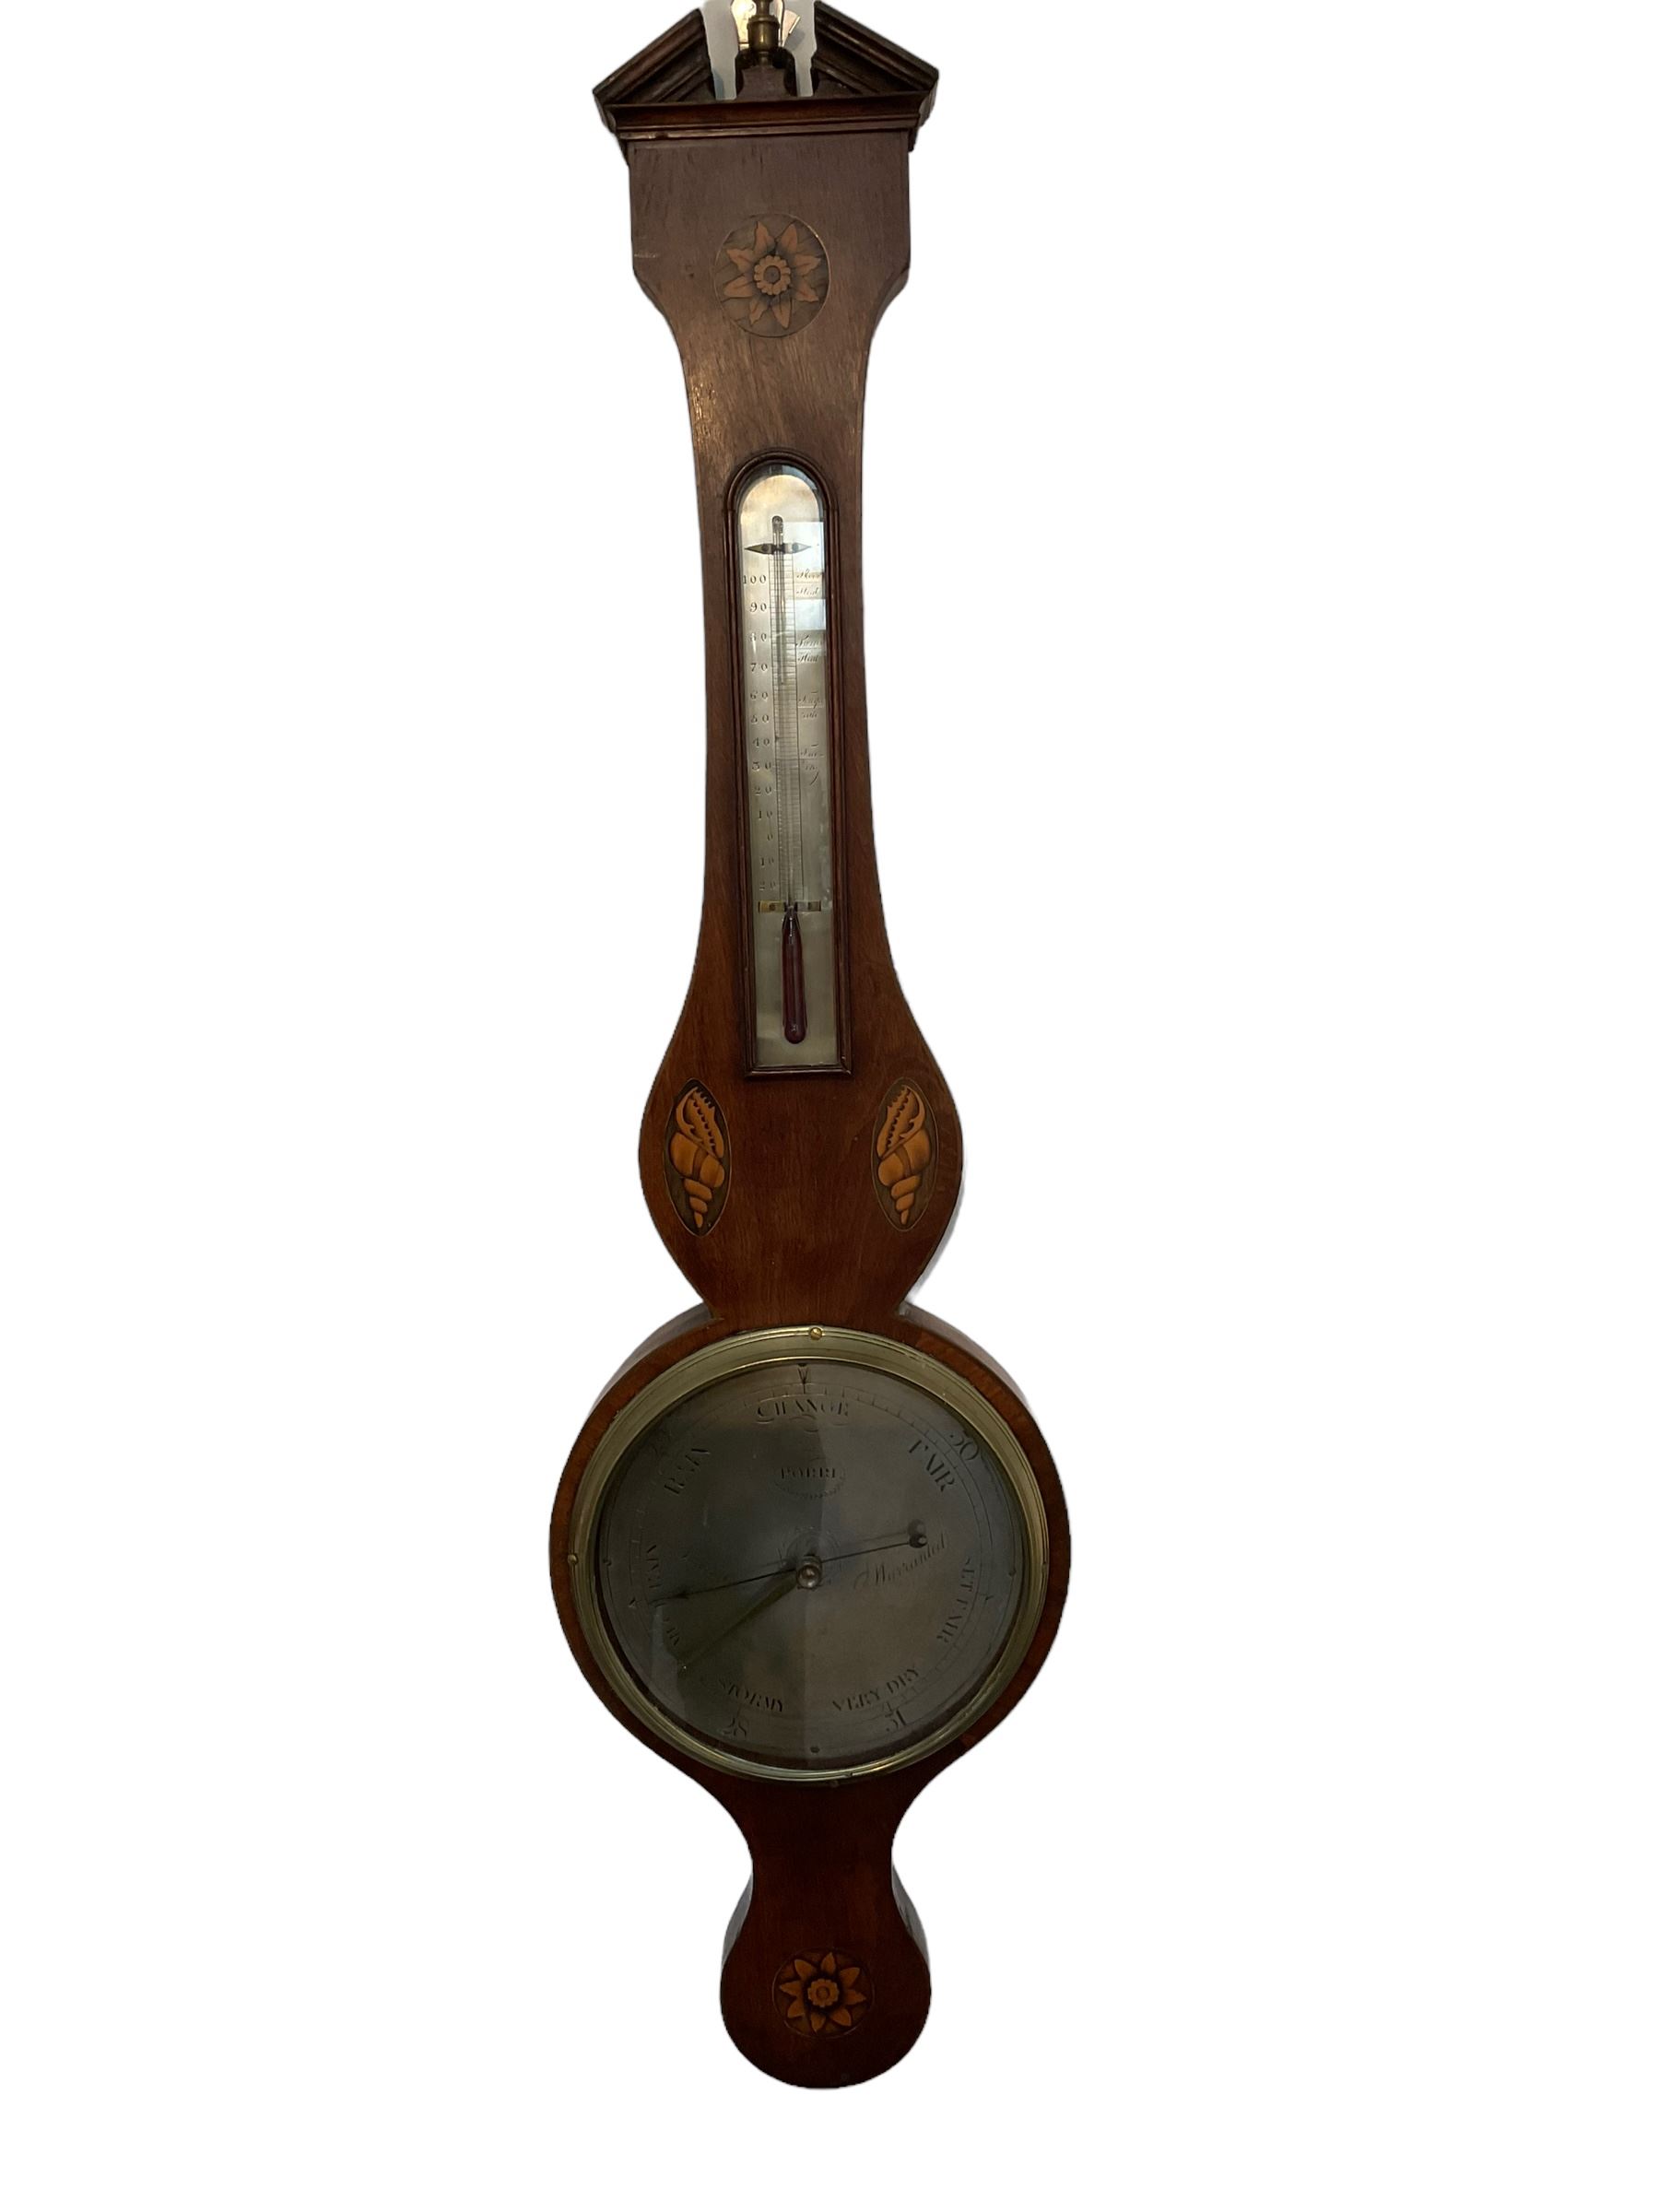 Early 19th century - Inlaid mahogany Sheraton mercury barometer with a silvered register and spirit